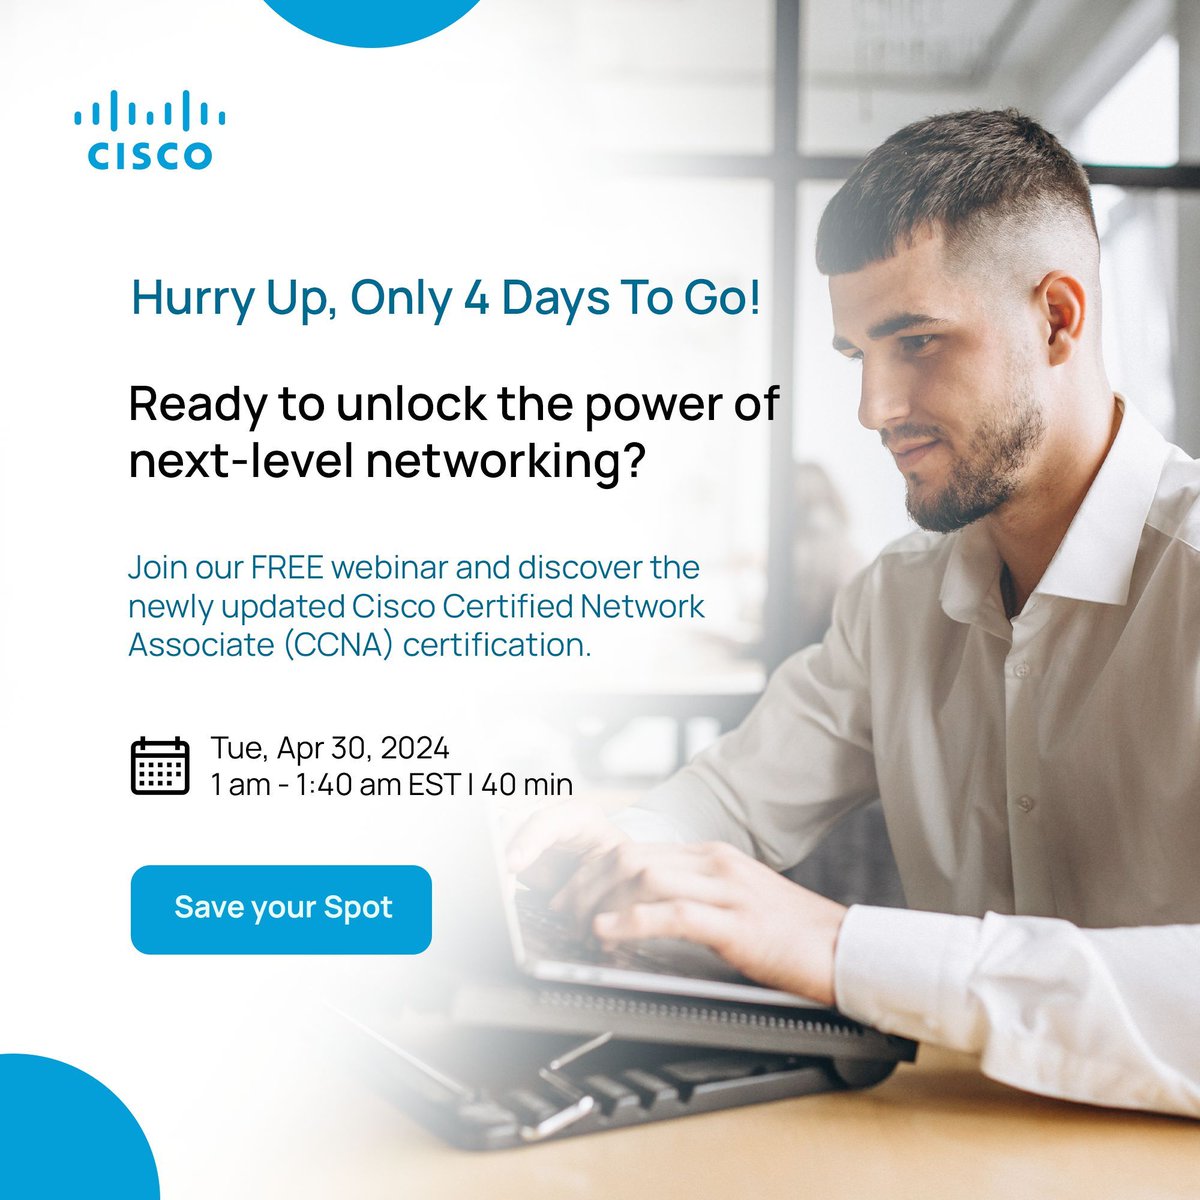 Enhance your networking prowess with the NEW CCNA certification! 
Only 4 days left to register! 
Gain skills in configuring, troubleshooting, security, and Cisco IOS. Get expert advice and tips to excel. 
Register Now!
buff.ly/3xCpRre 
#FreeWebinar #CCNA #Networking